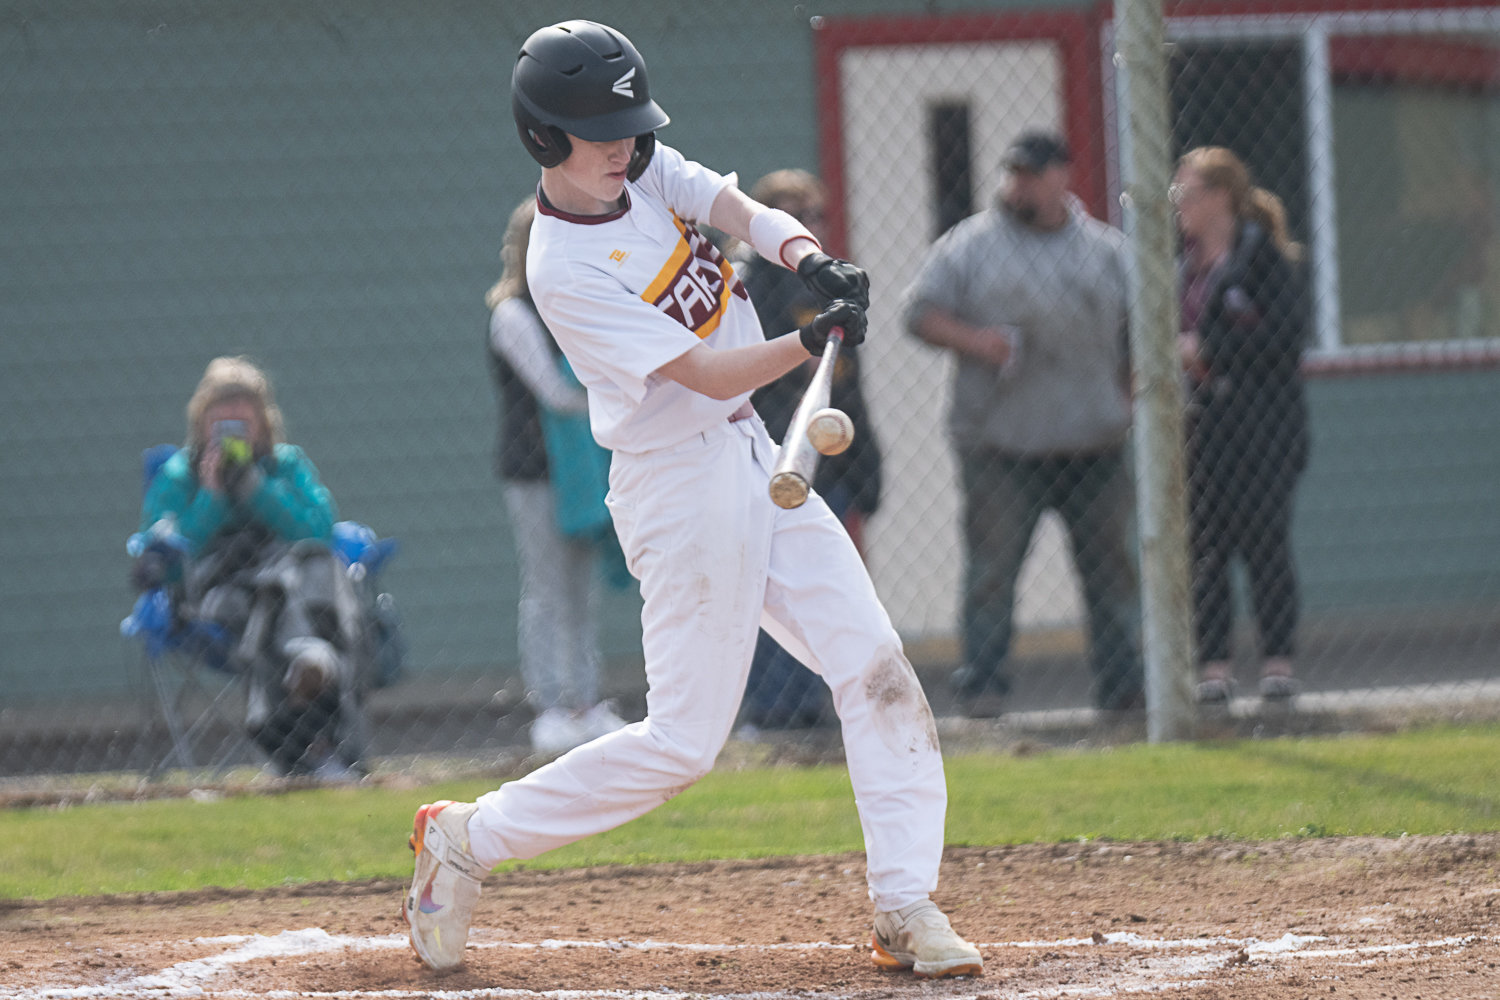 Carter Svenson makes contact during Winlock's game against MWP on March 27.